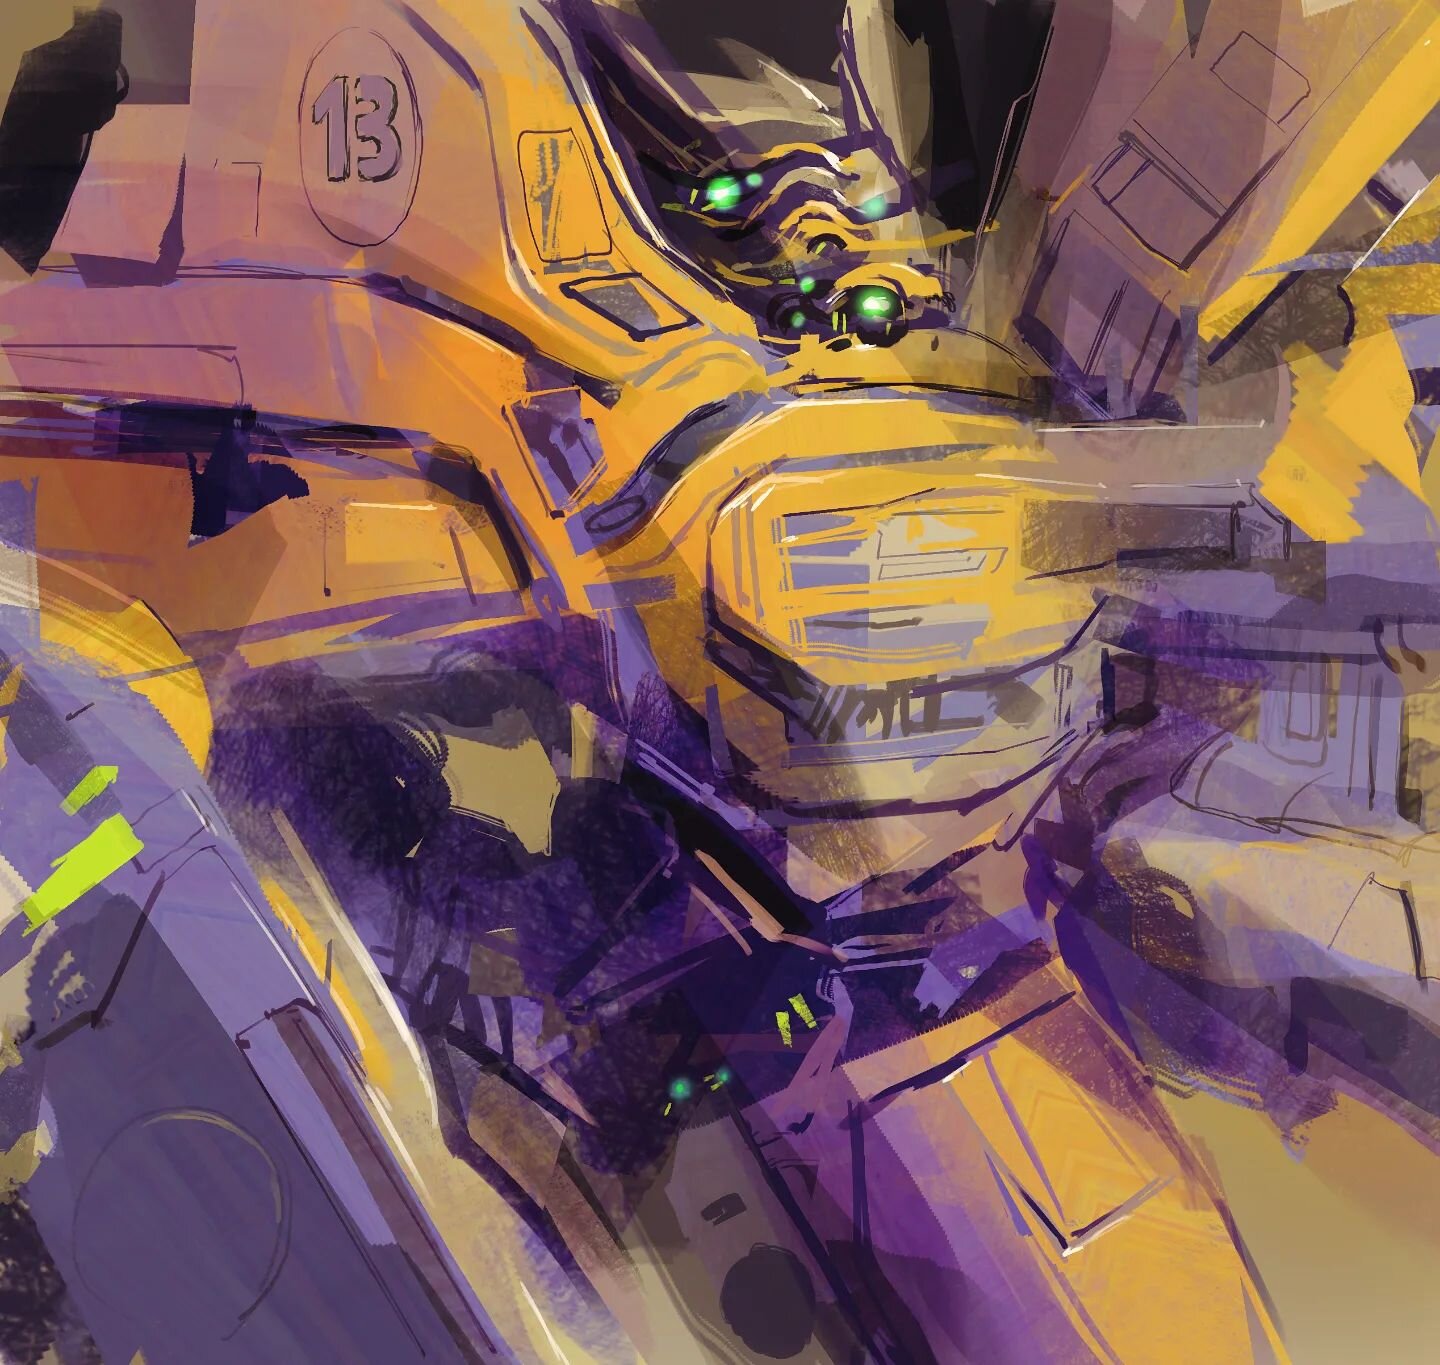 Doing a Sparth brush abstract style, working like this is so fun! Almost no line art drawing, only painting 

#marchofrobots #robot #mechas #conceptart #conceptartist #conceptartwork #artist #scifiart #igdesign #digitalart #speedpaint #speedpainting 